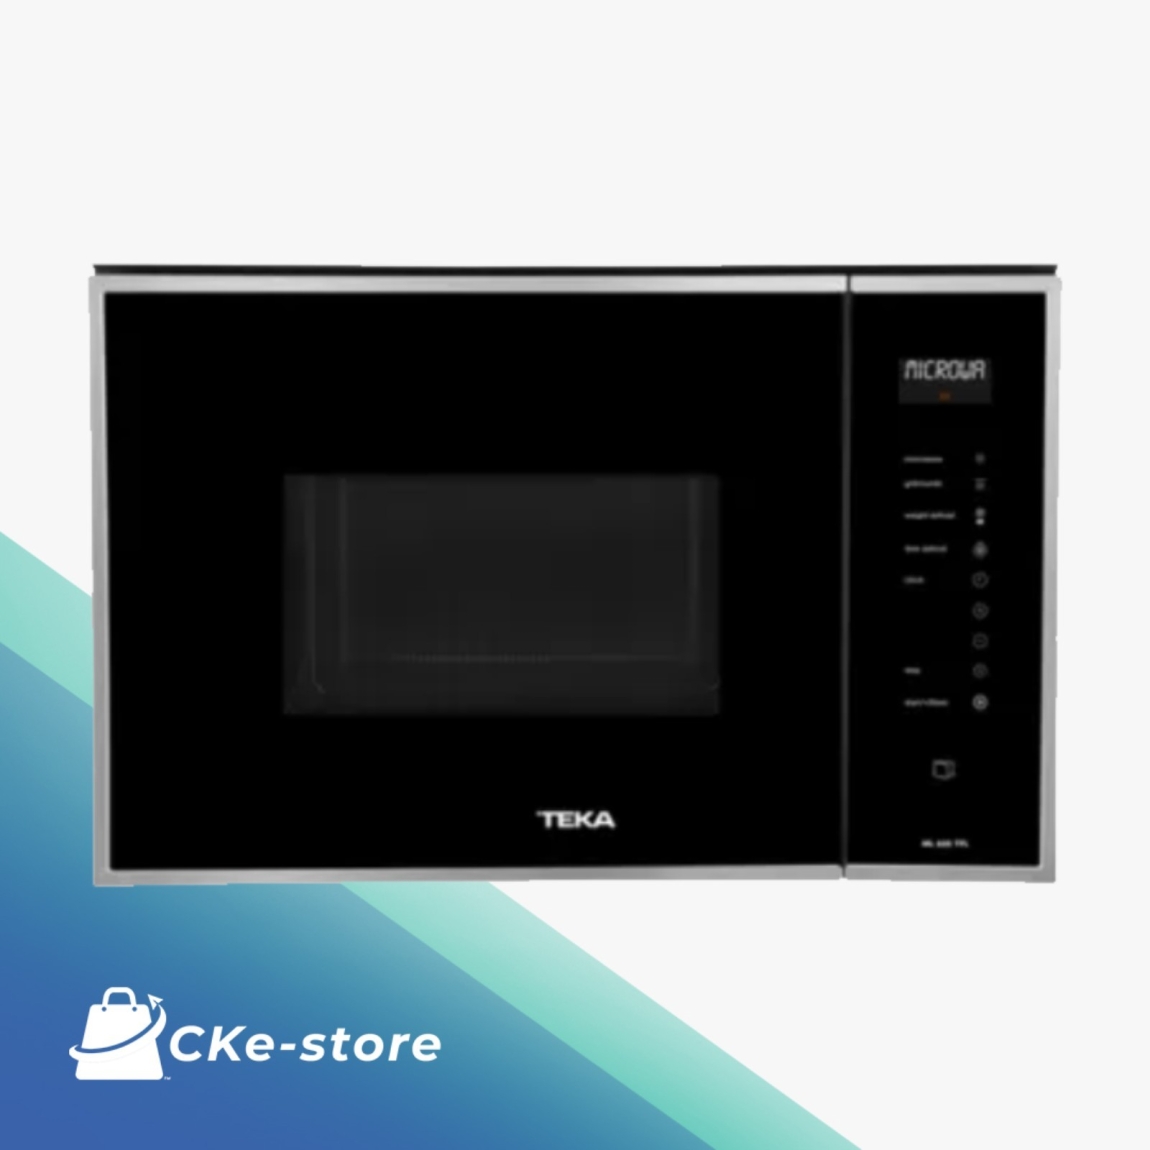 TEKA 25L Built-in Microwave + Grill with Full Touch Control - ML 825 TFL TEKA Microwave / Oven / Steam Oven Kitchen Microwave / Oven / Steam Oven Choose Sample / Pattern Chart